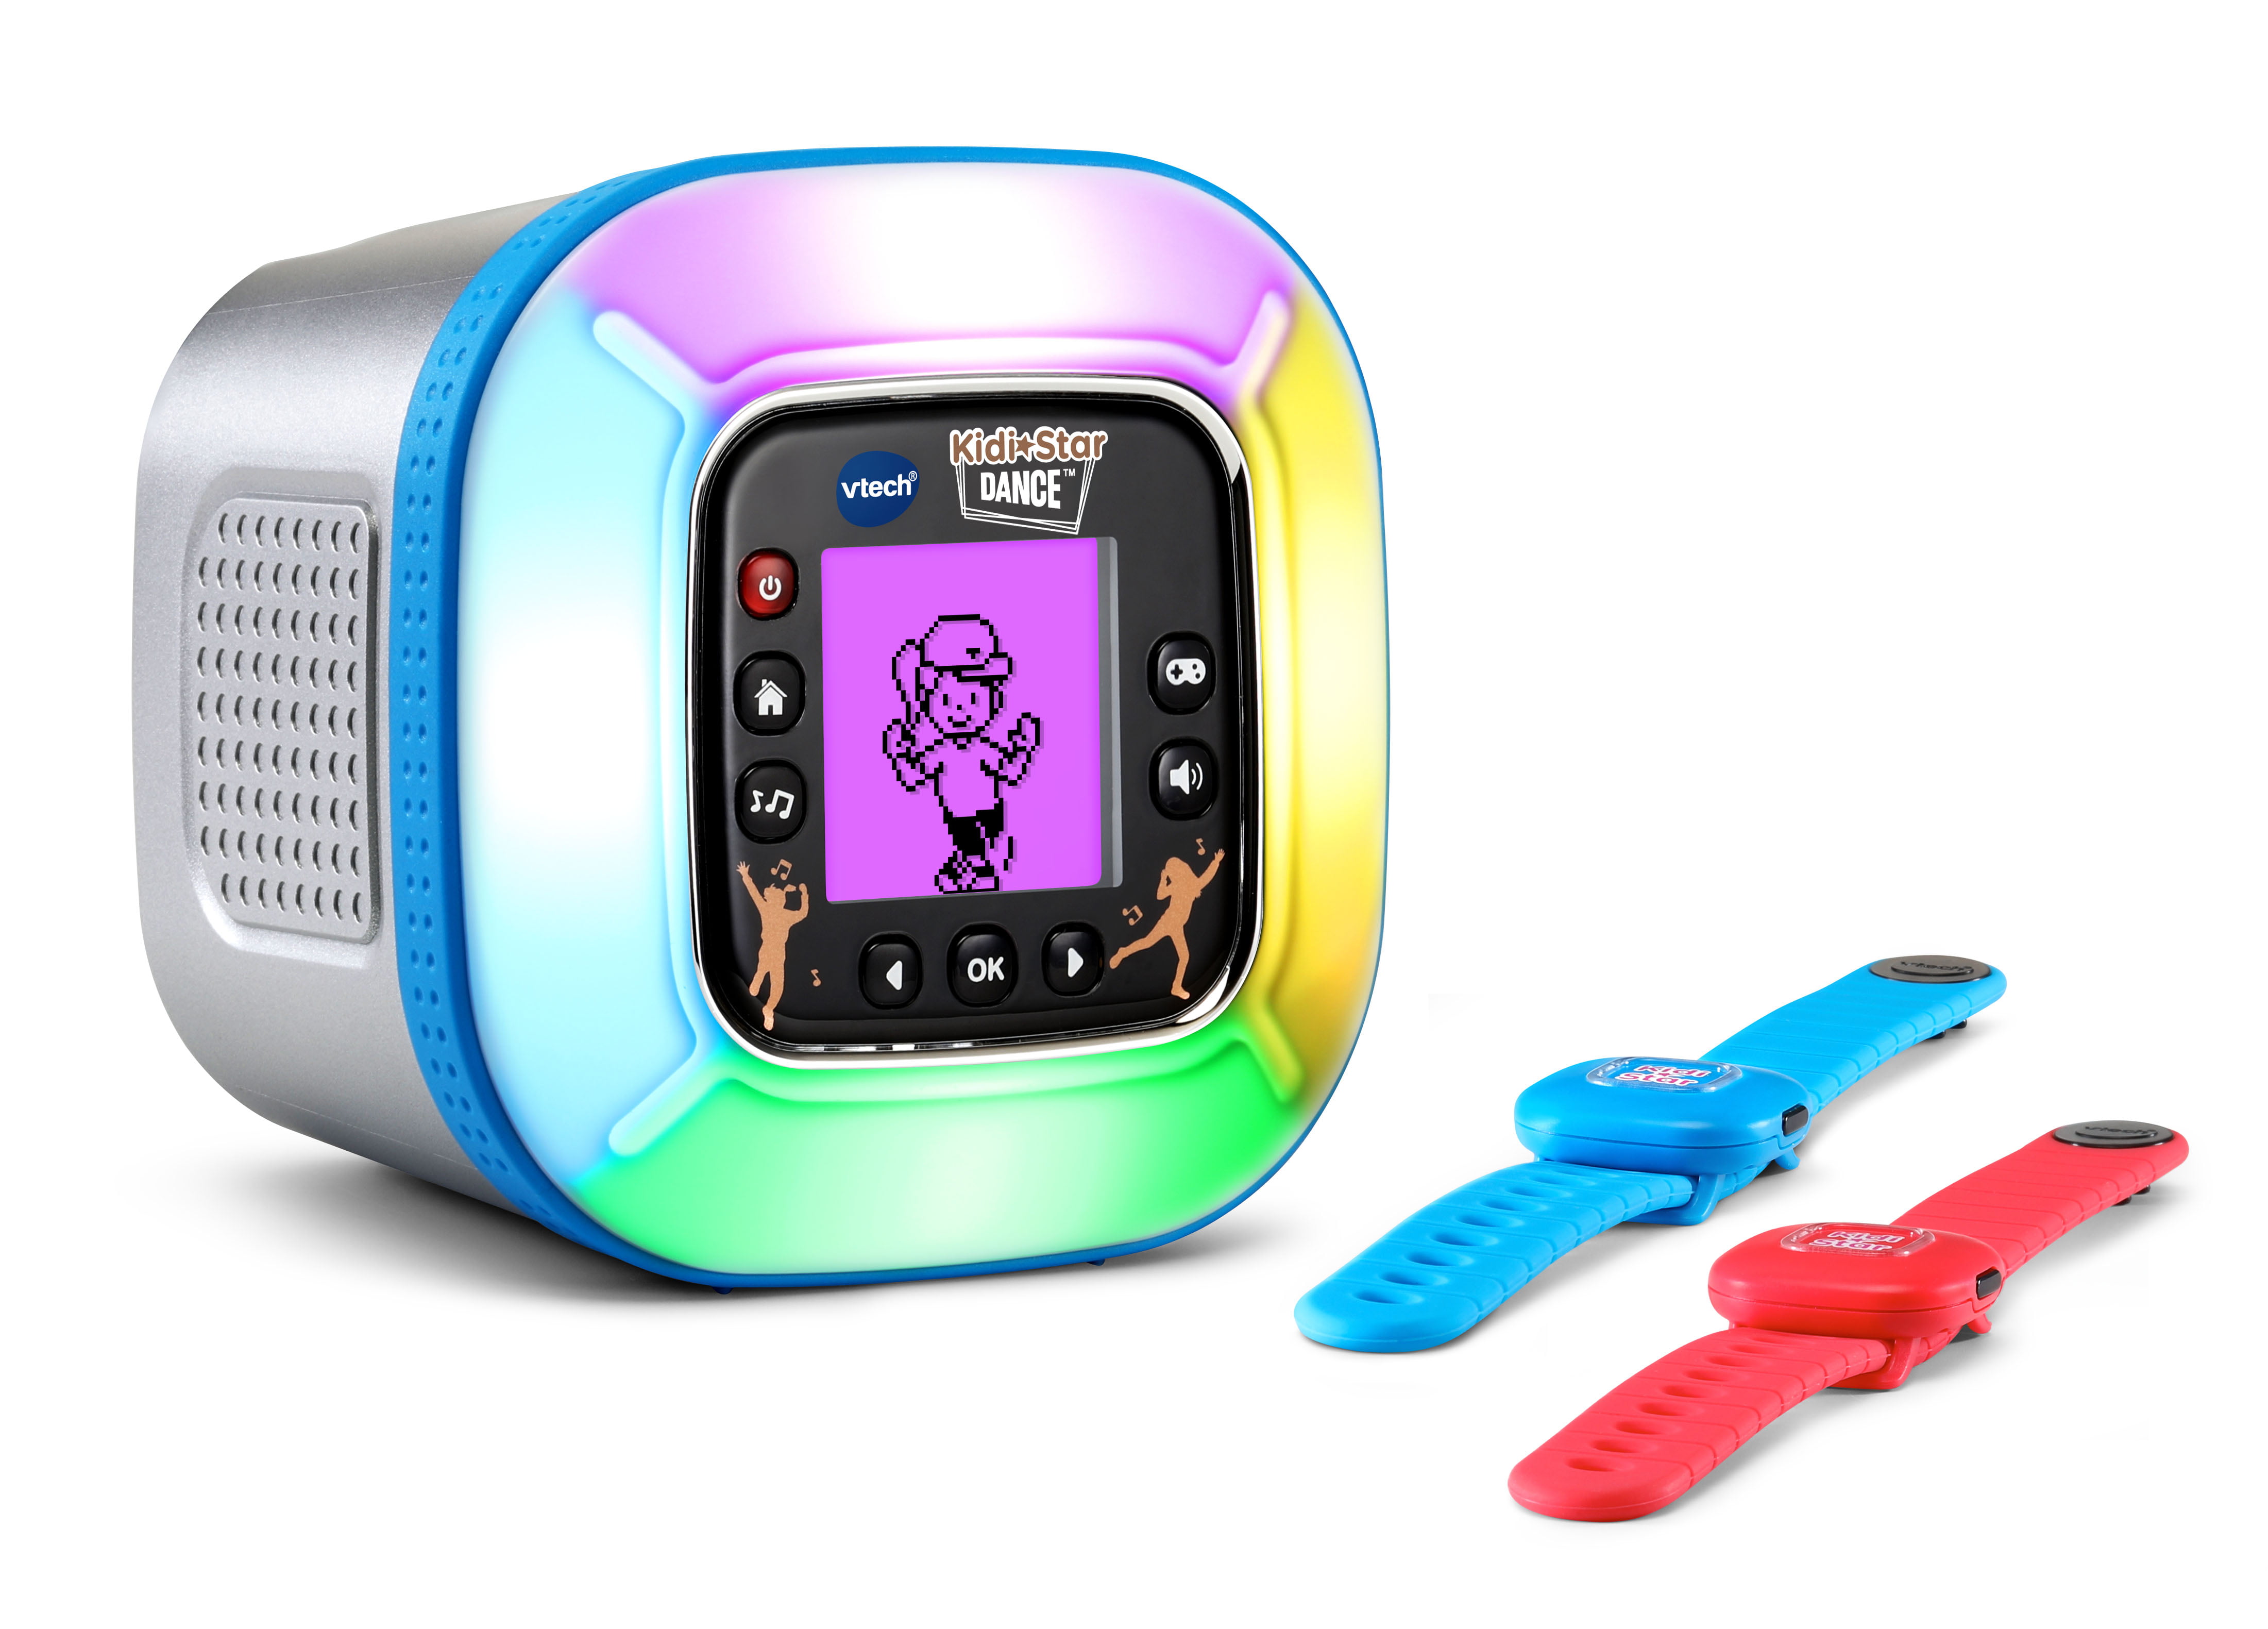 VTech Kidi Star Dance With Animated Dance Moves Instructor 